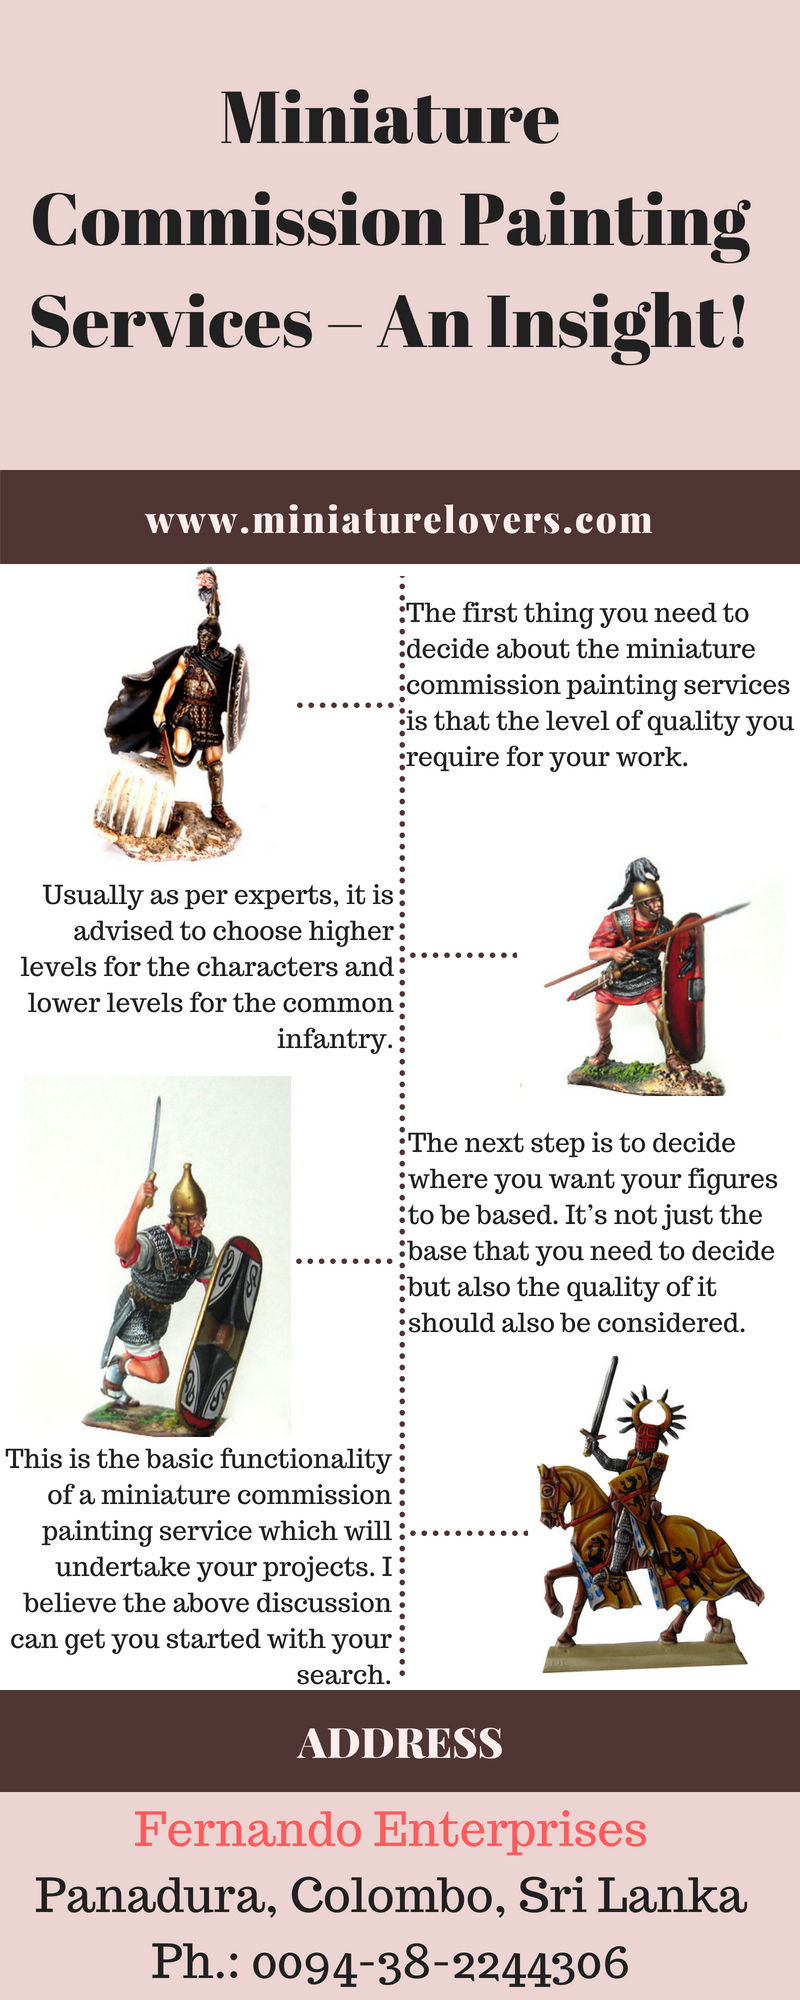 Miniature Commission Painting Services – An Insight!.jpg  by miniaturelovers10